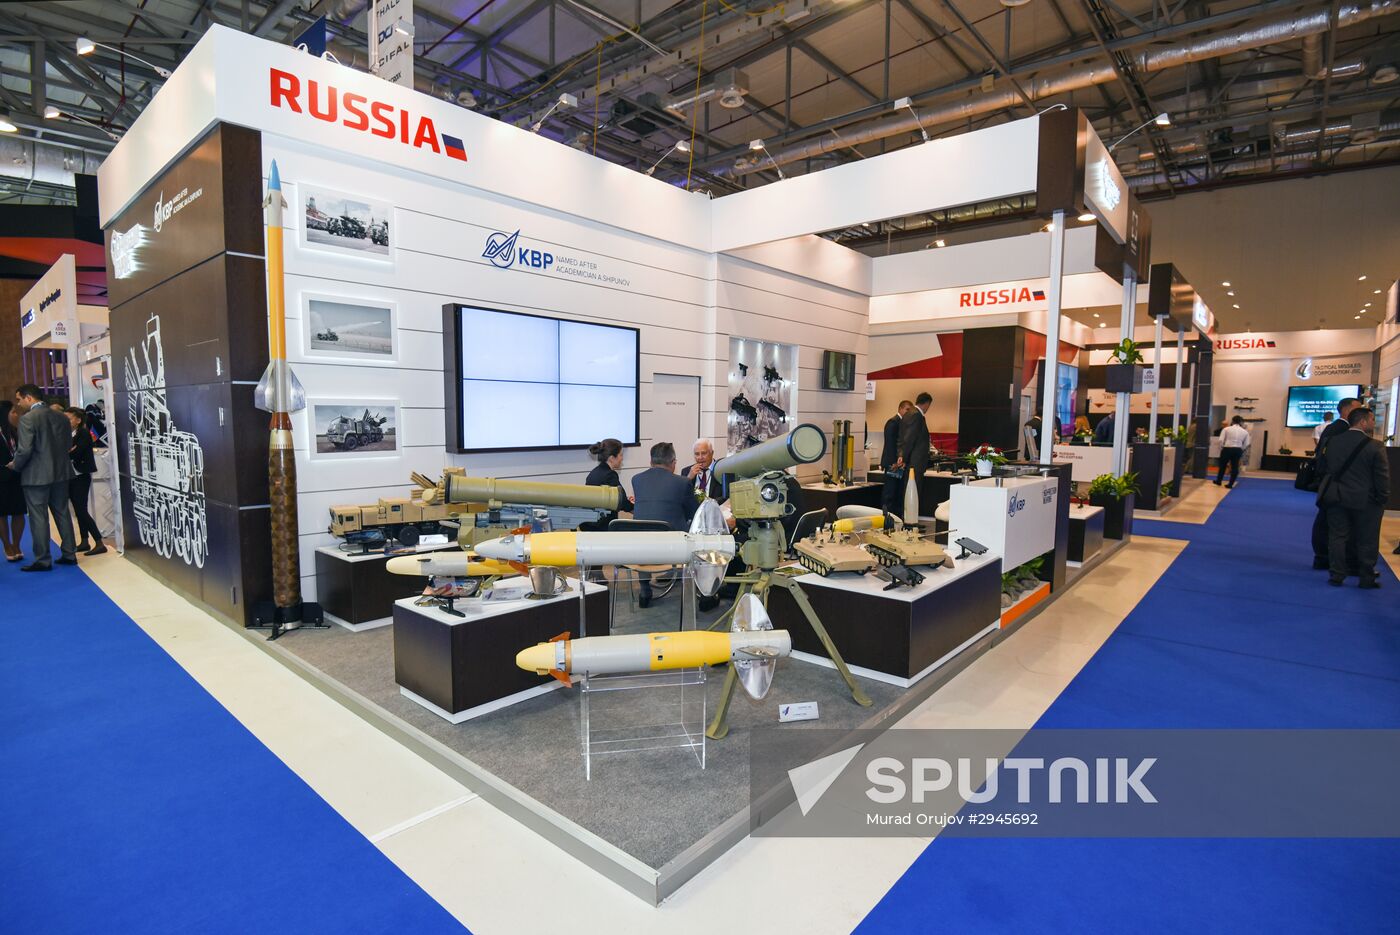 ADEX-2016 arms and military equipment exhibition in Baku